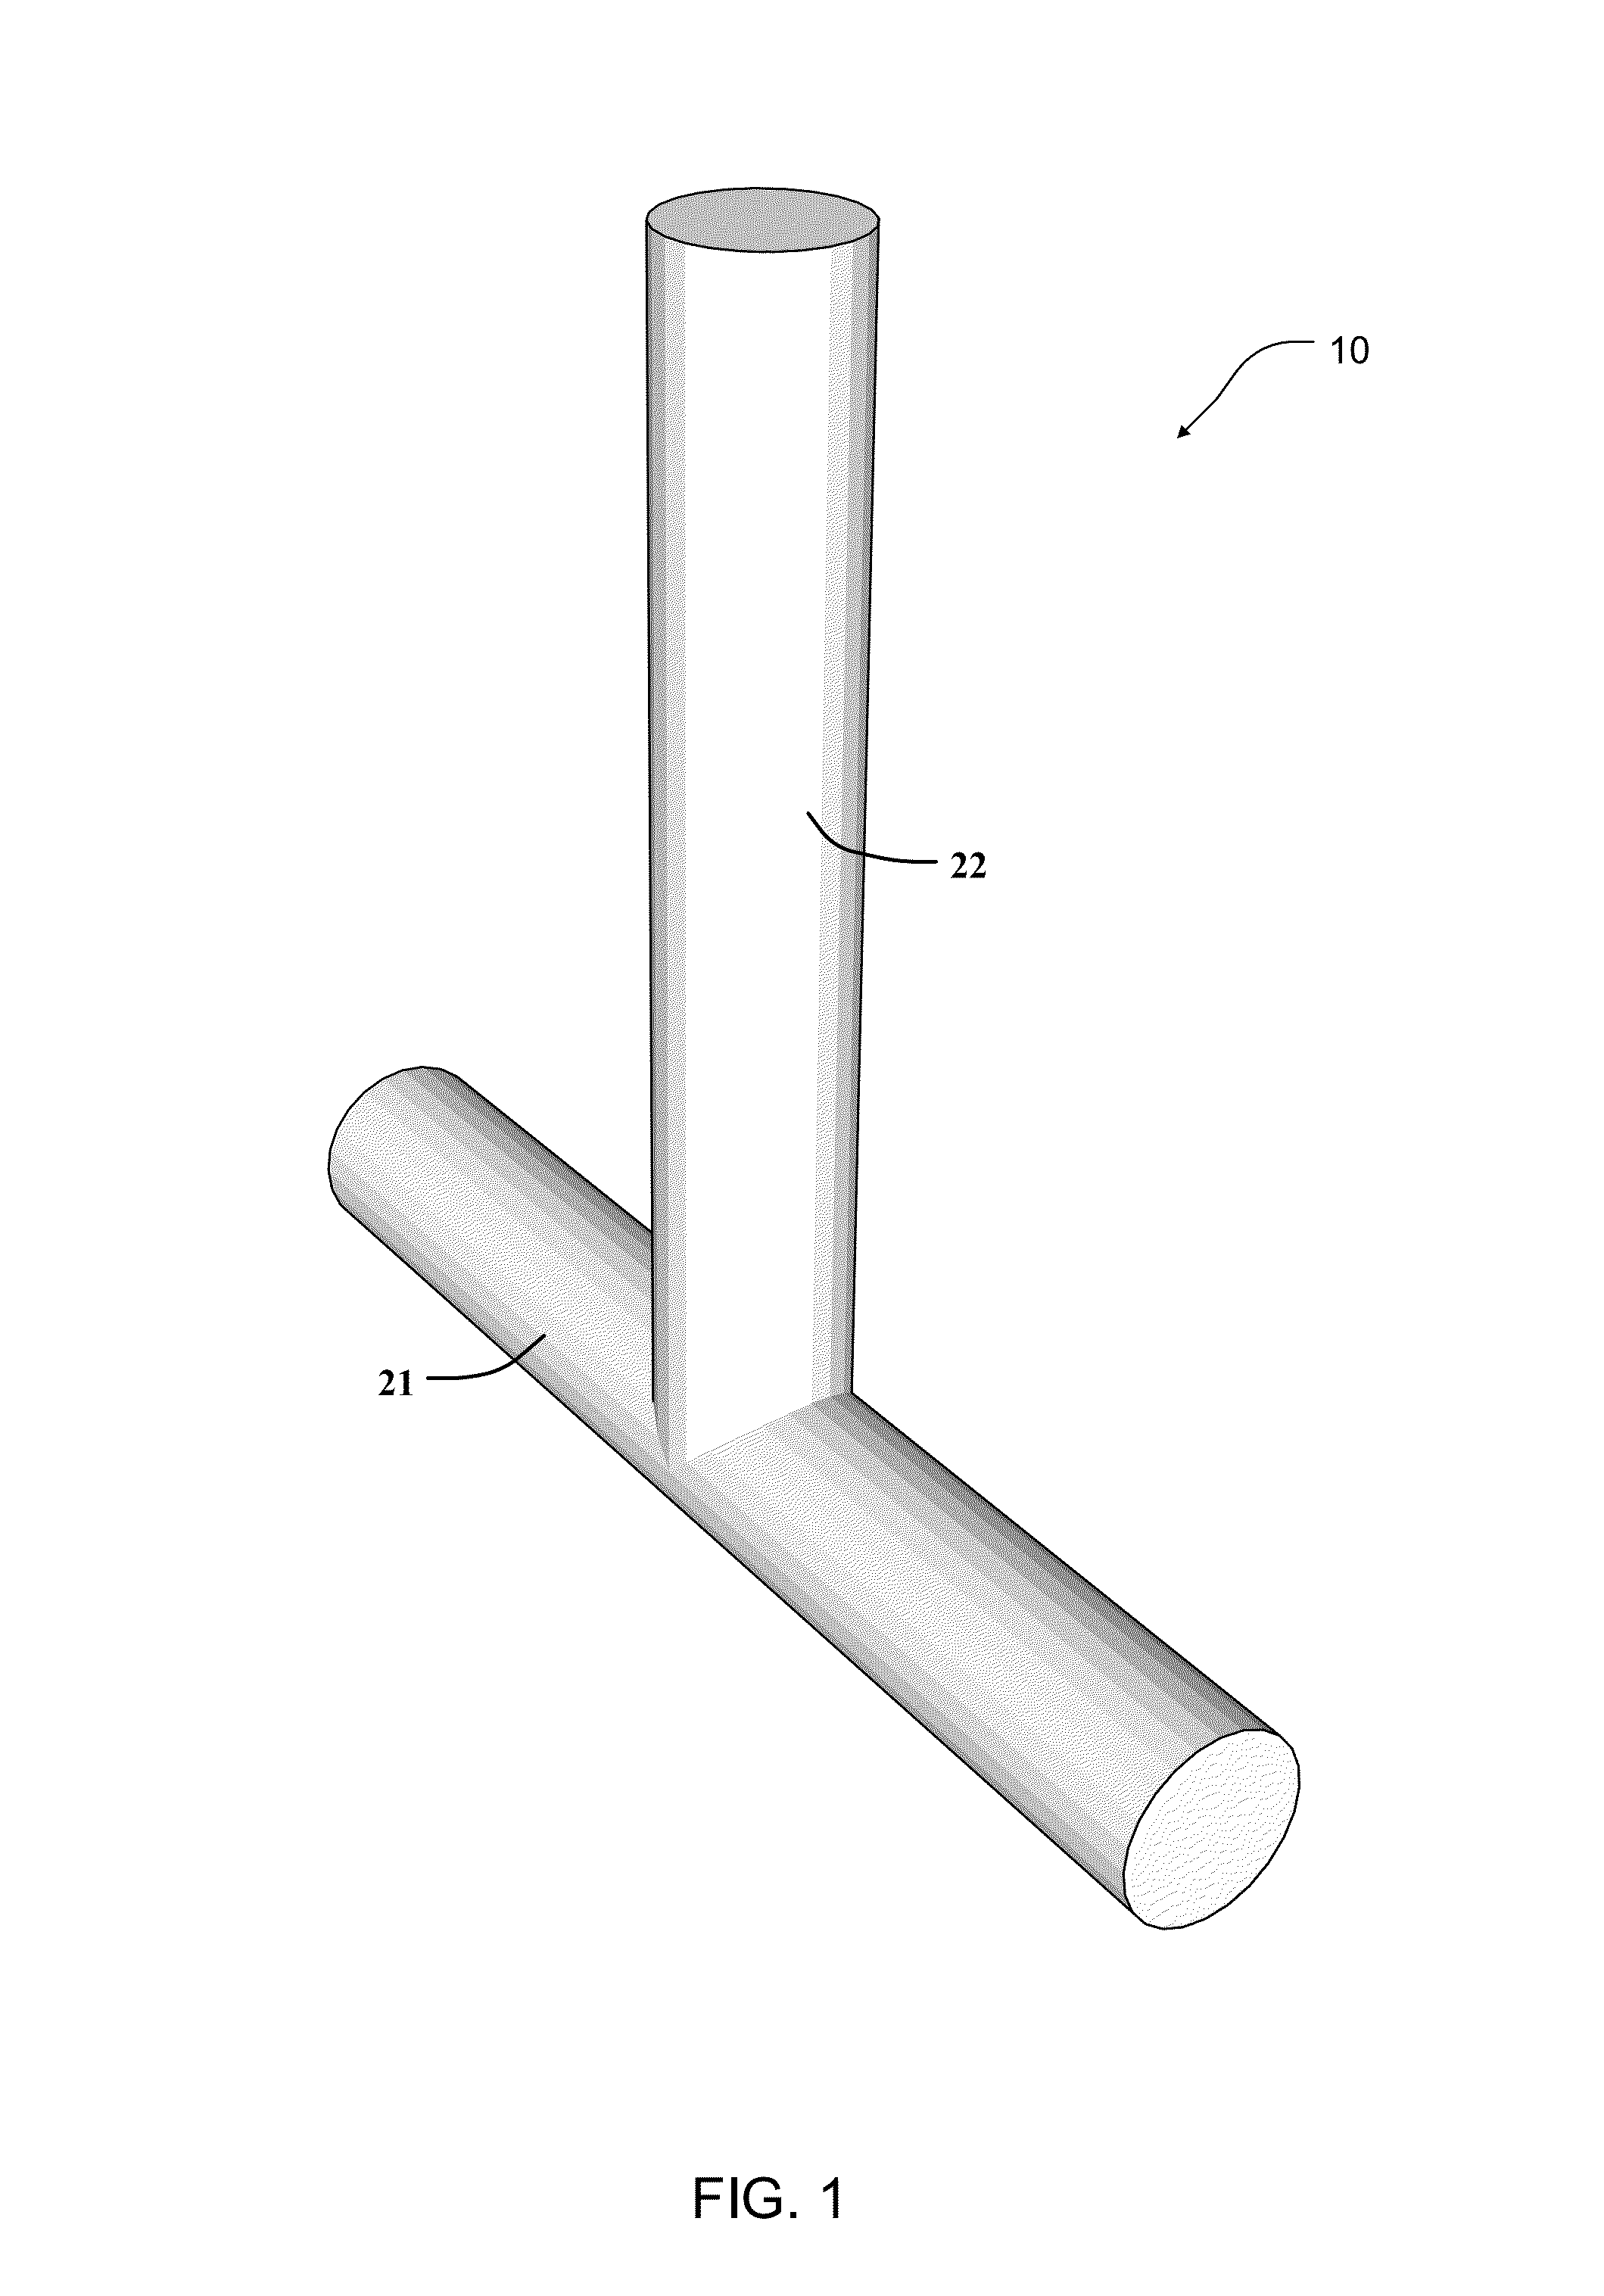 Spinal support device